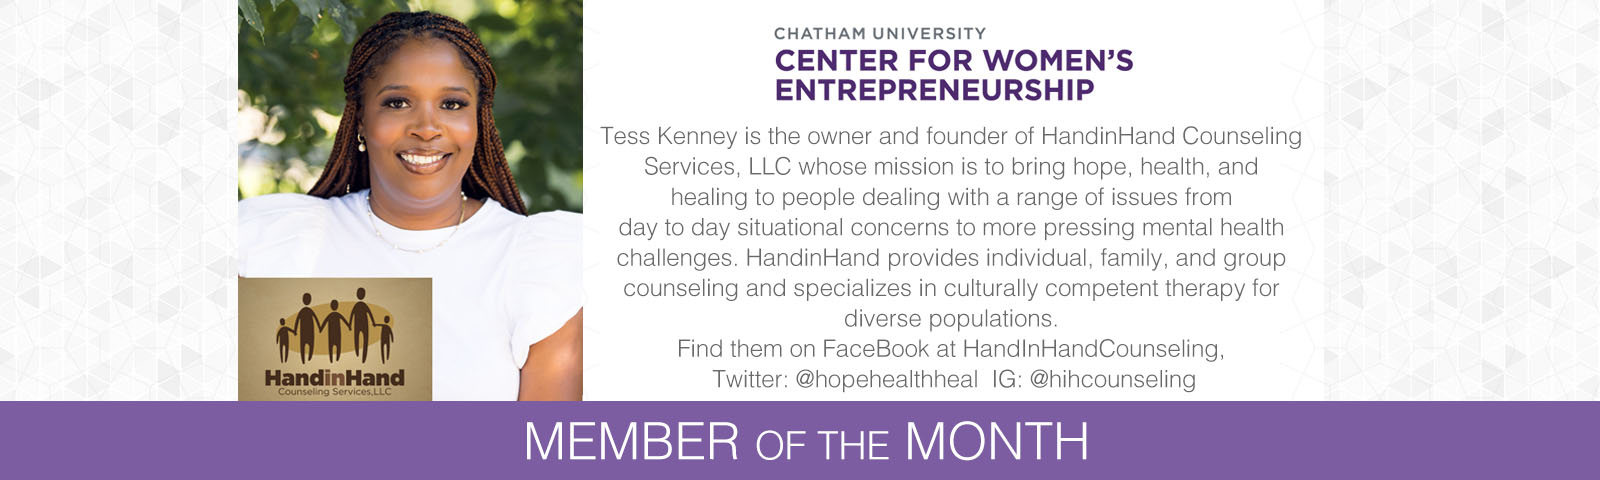 Tess Kenney is the owner and founder of HandinHand Counseling Services, LLC whose mission is to bring hope, health, and healing to people dealing with a range of issues from day to day situational concerns to more pressing mental health challenges. HandinHand provides individual, family, and group counseling and specializes in culturally competent therapy for diverse populations. 
Find them on FaceBook at HandInHandCounseling, T Twitter: @hopehealthheal  IG: @hihcounseling